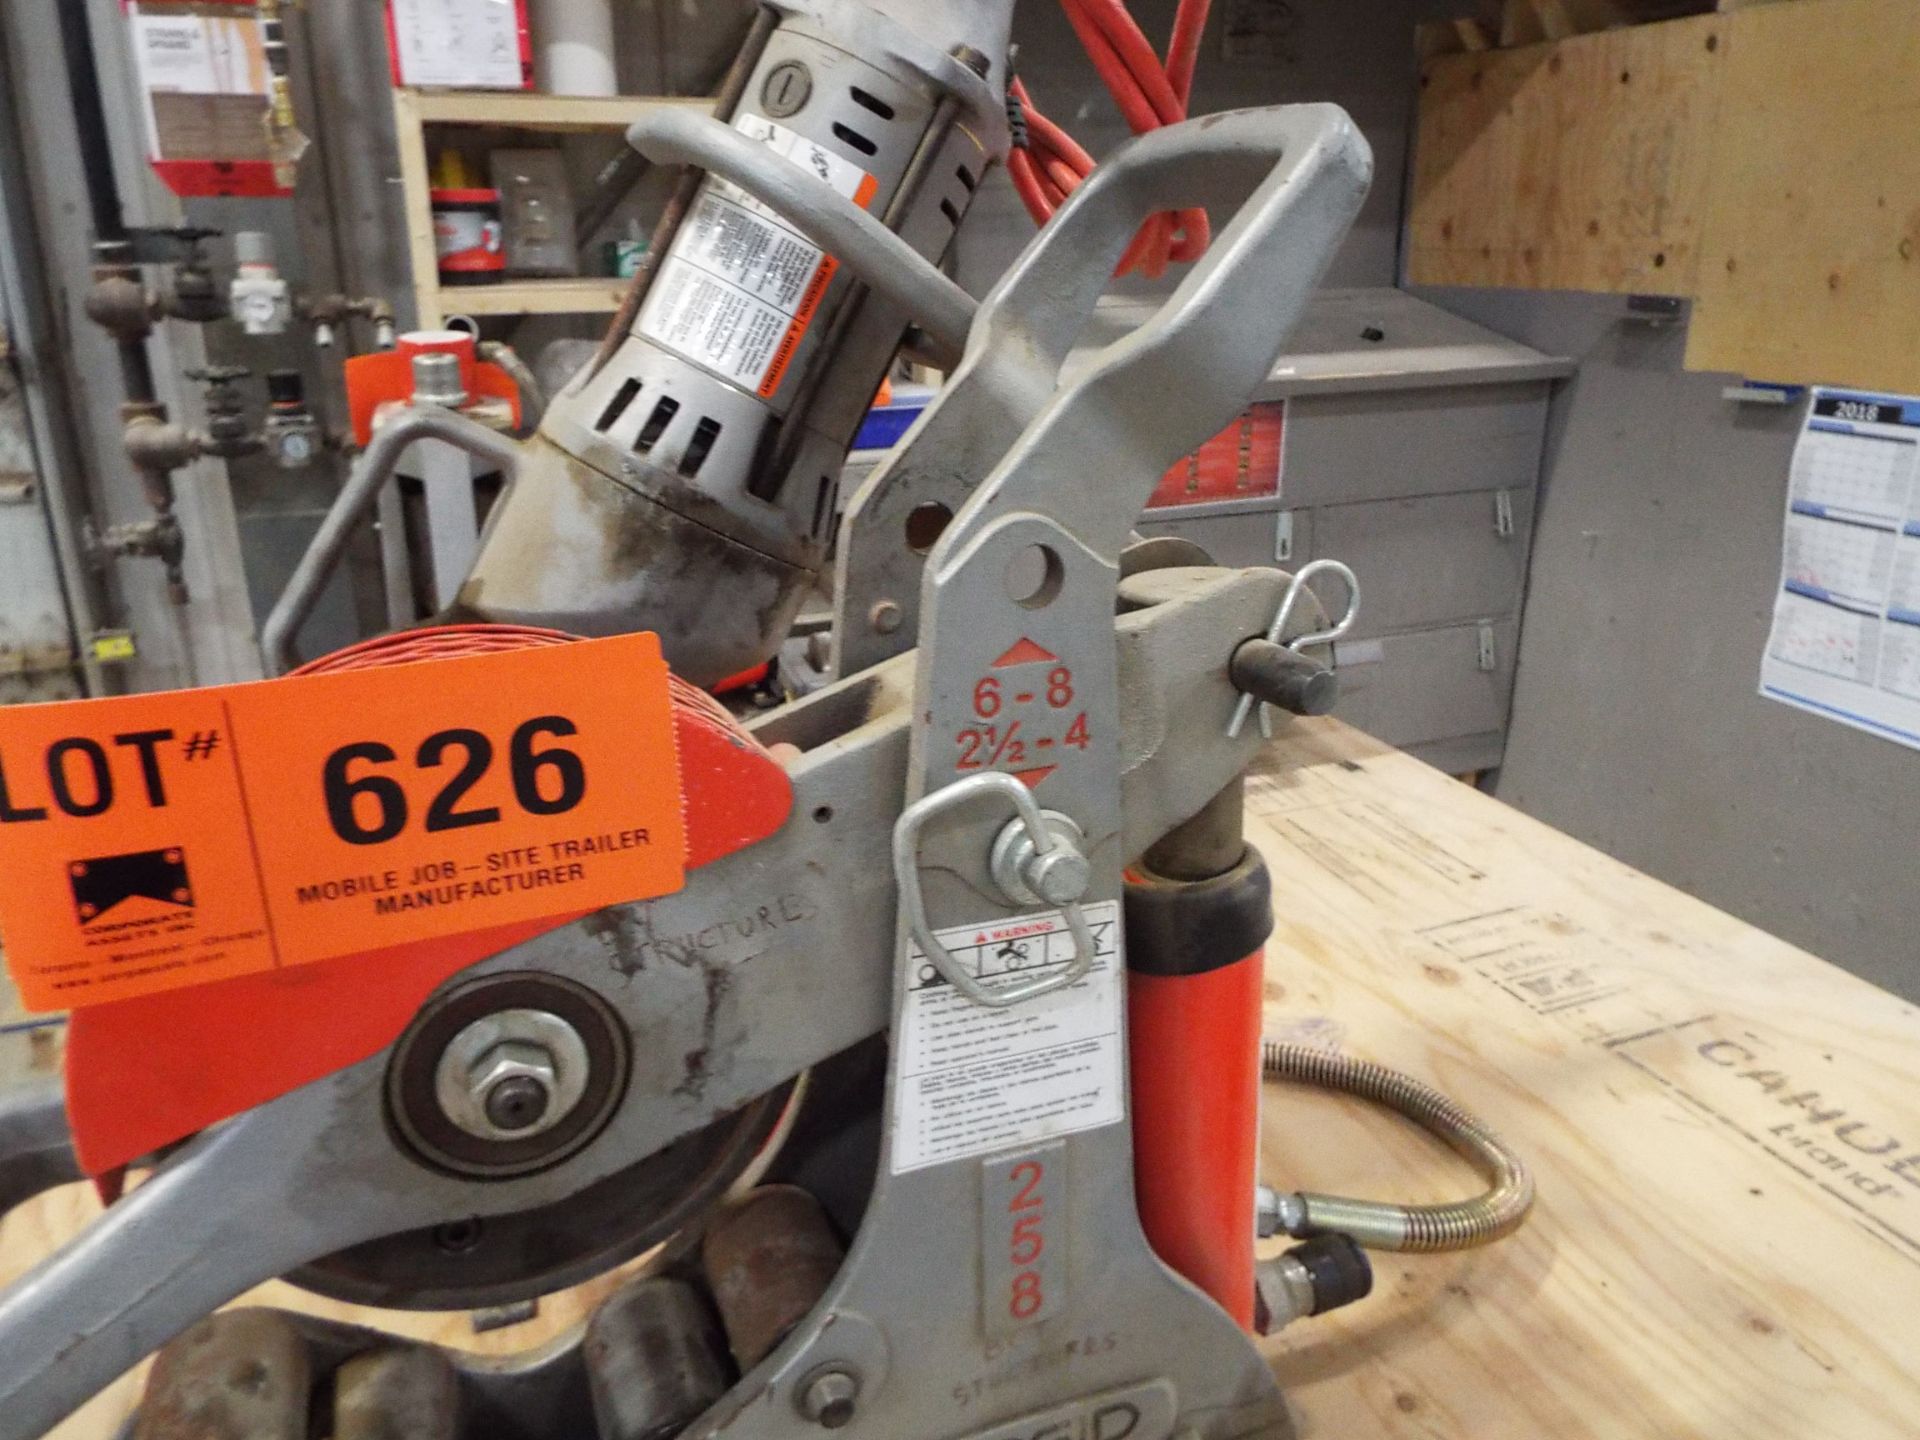 RIDGID 258 HYDRAULIC 2.5"-4" PIPE CUTTING ATTACHMENT WITH DRIVER AND HYDRAULIC POWER PACK, S/N N/A - Image 2 of 3